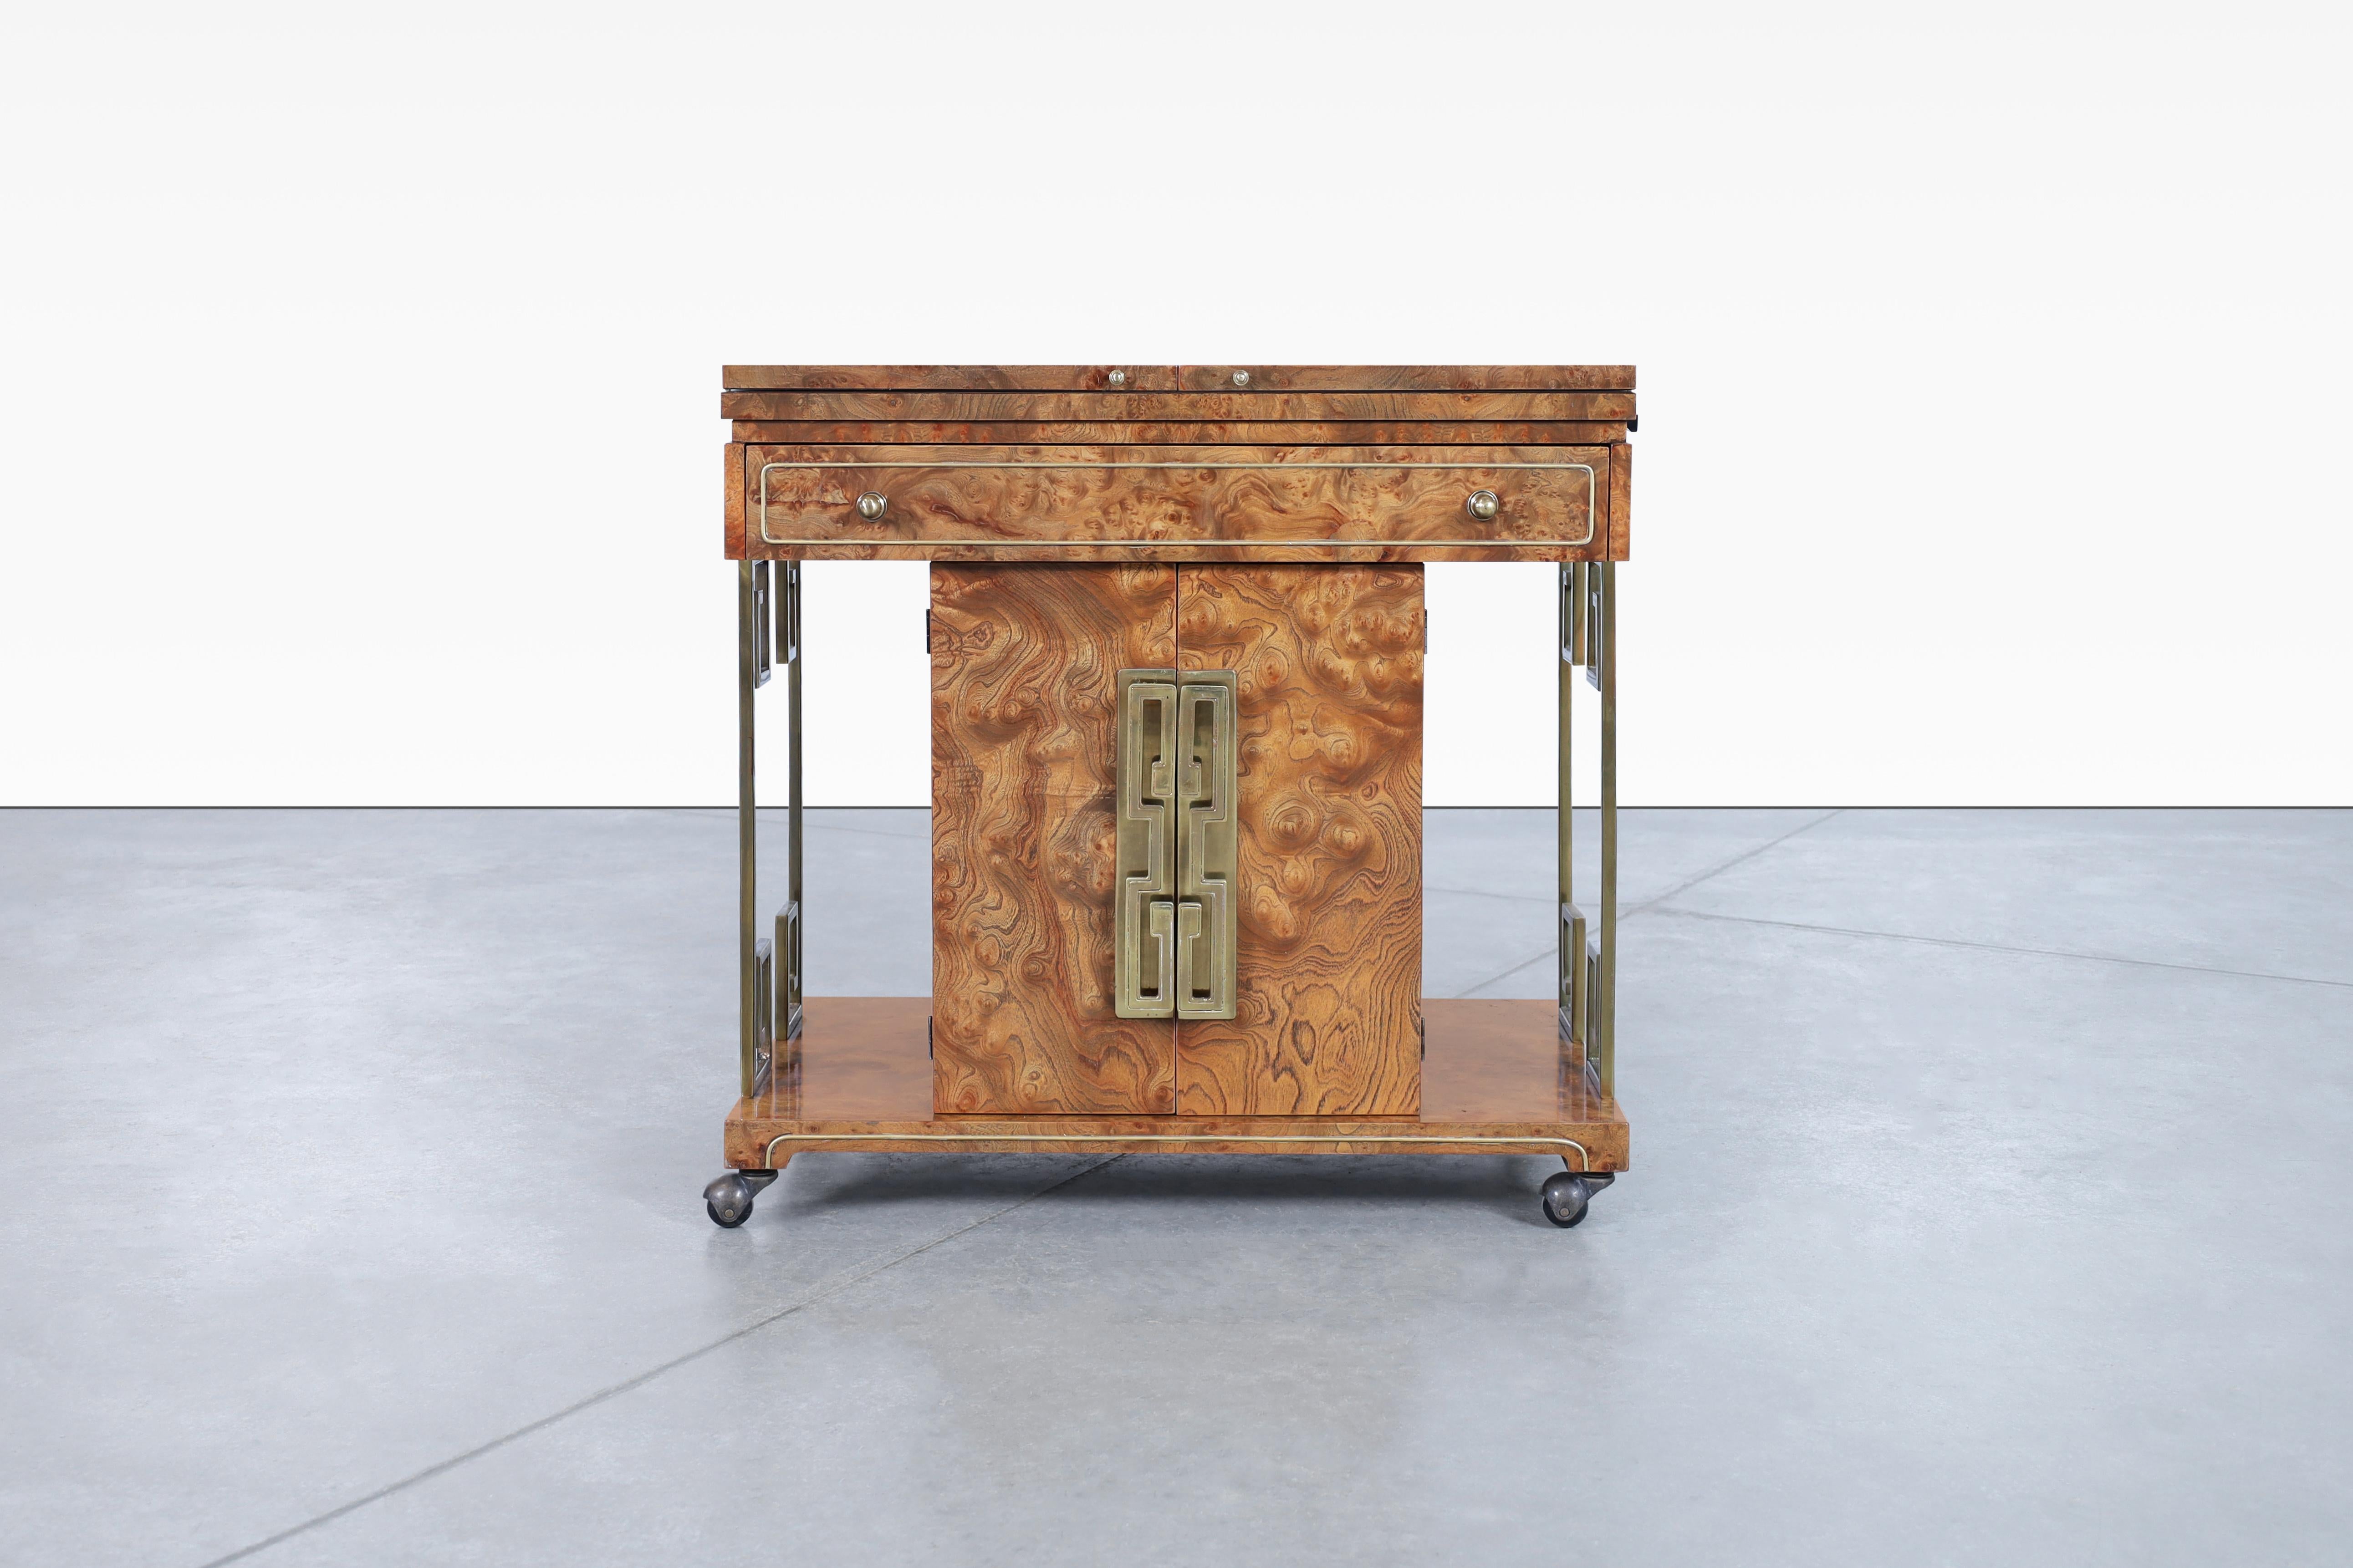 Stunning vintage burl wood and brass bar produced in the United States, circa 1970s. Created by the renowned designer Bernhard Rohne and manufactured by Mastercraft, this bar cart exudes the modernism movement. Crafted with attention to detail, it